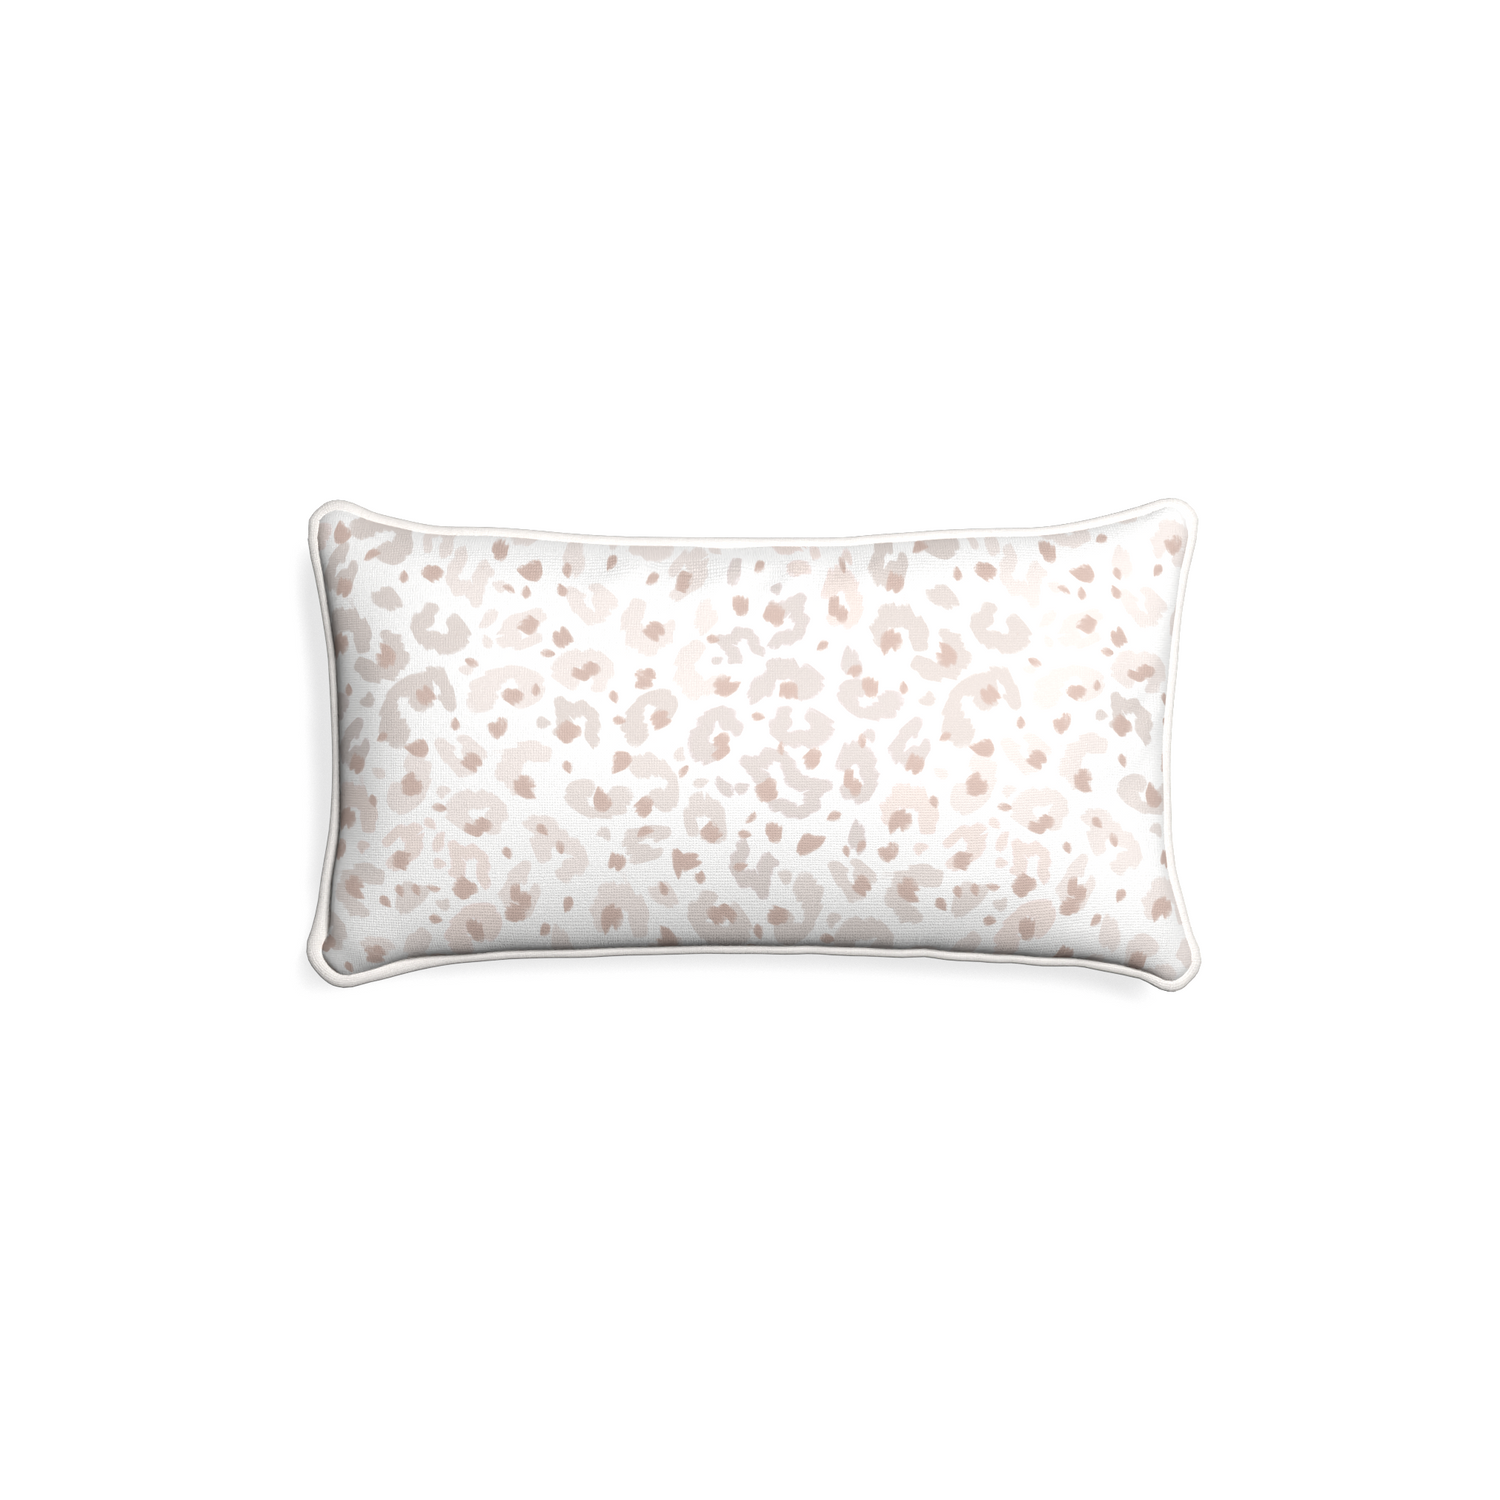 Petite-lumbar rosie custom beige animal printpillow with snow piping on white background